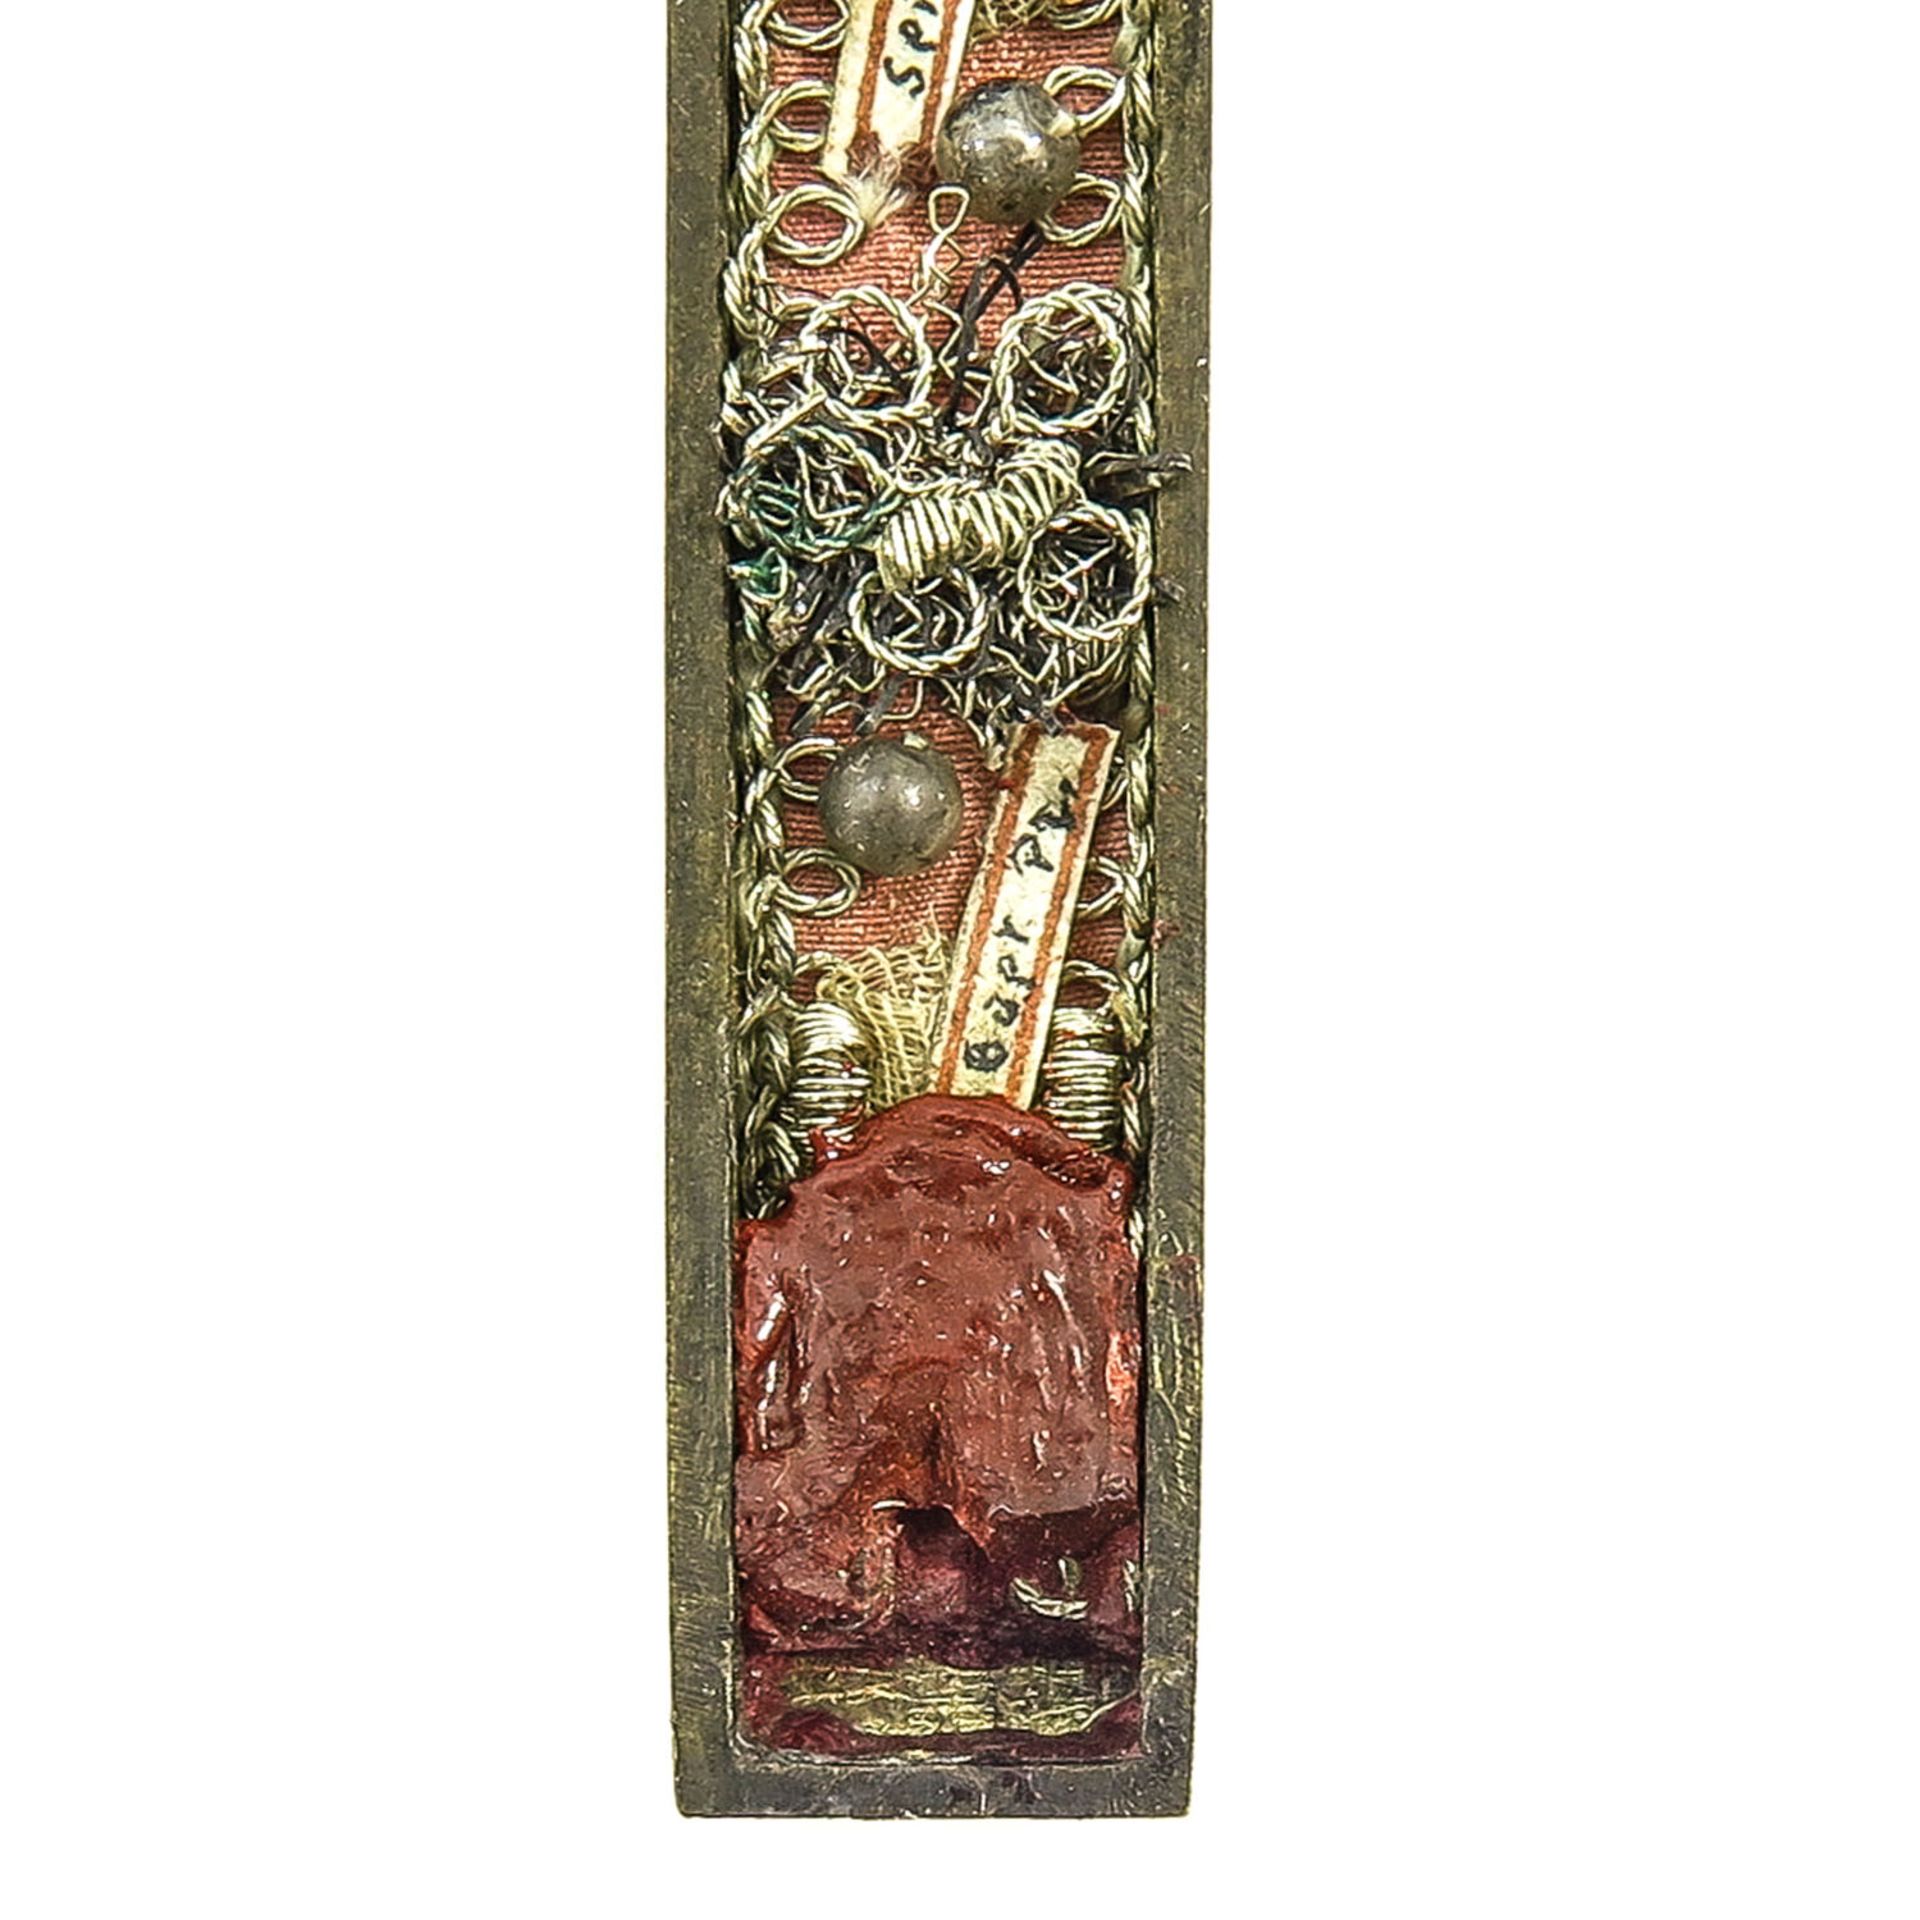 An 18th Century Bronze Relic Holder - Image 3 of 4